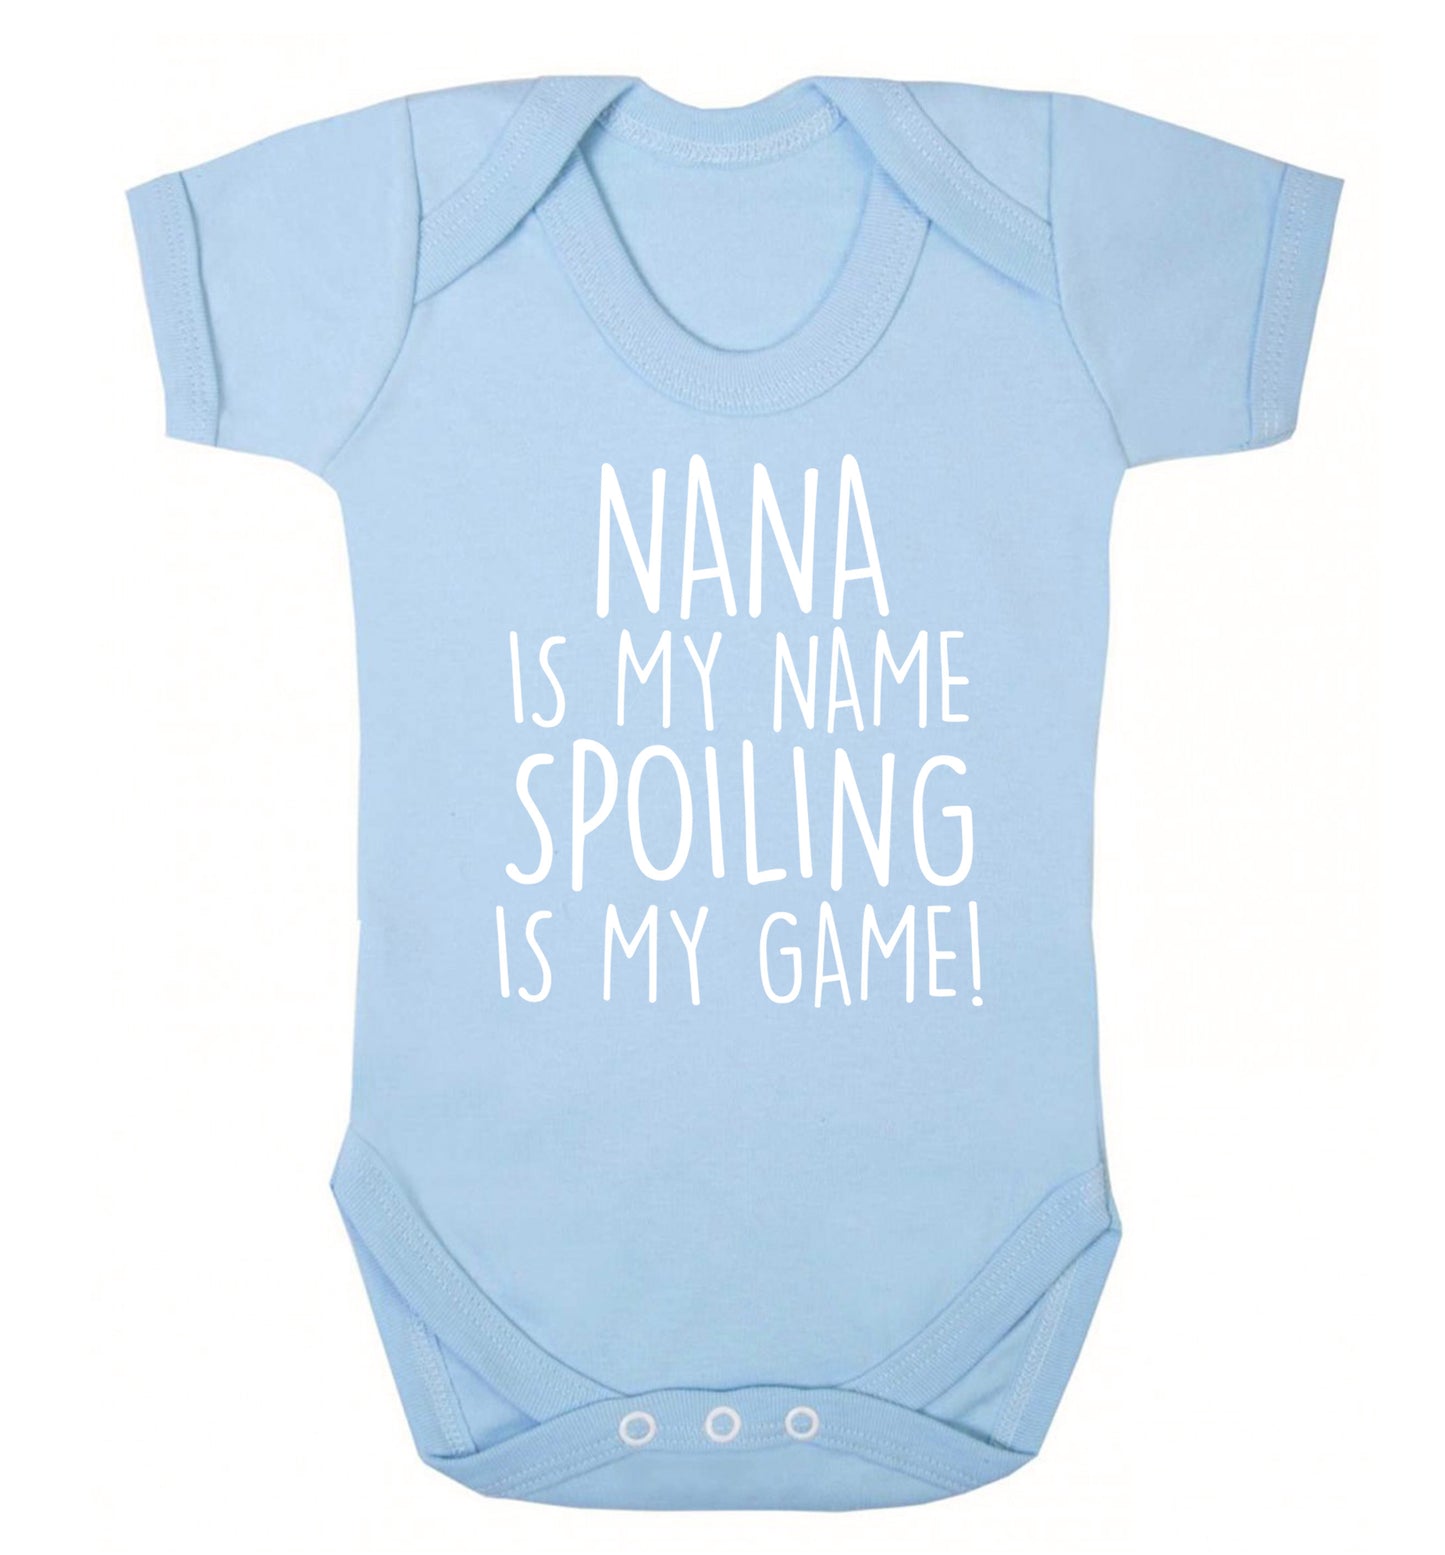 Nana is my name, spoiling is my game Baby Vest pale blue 18-24 months